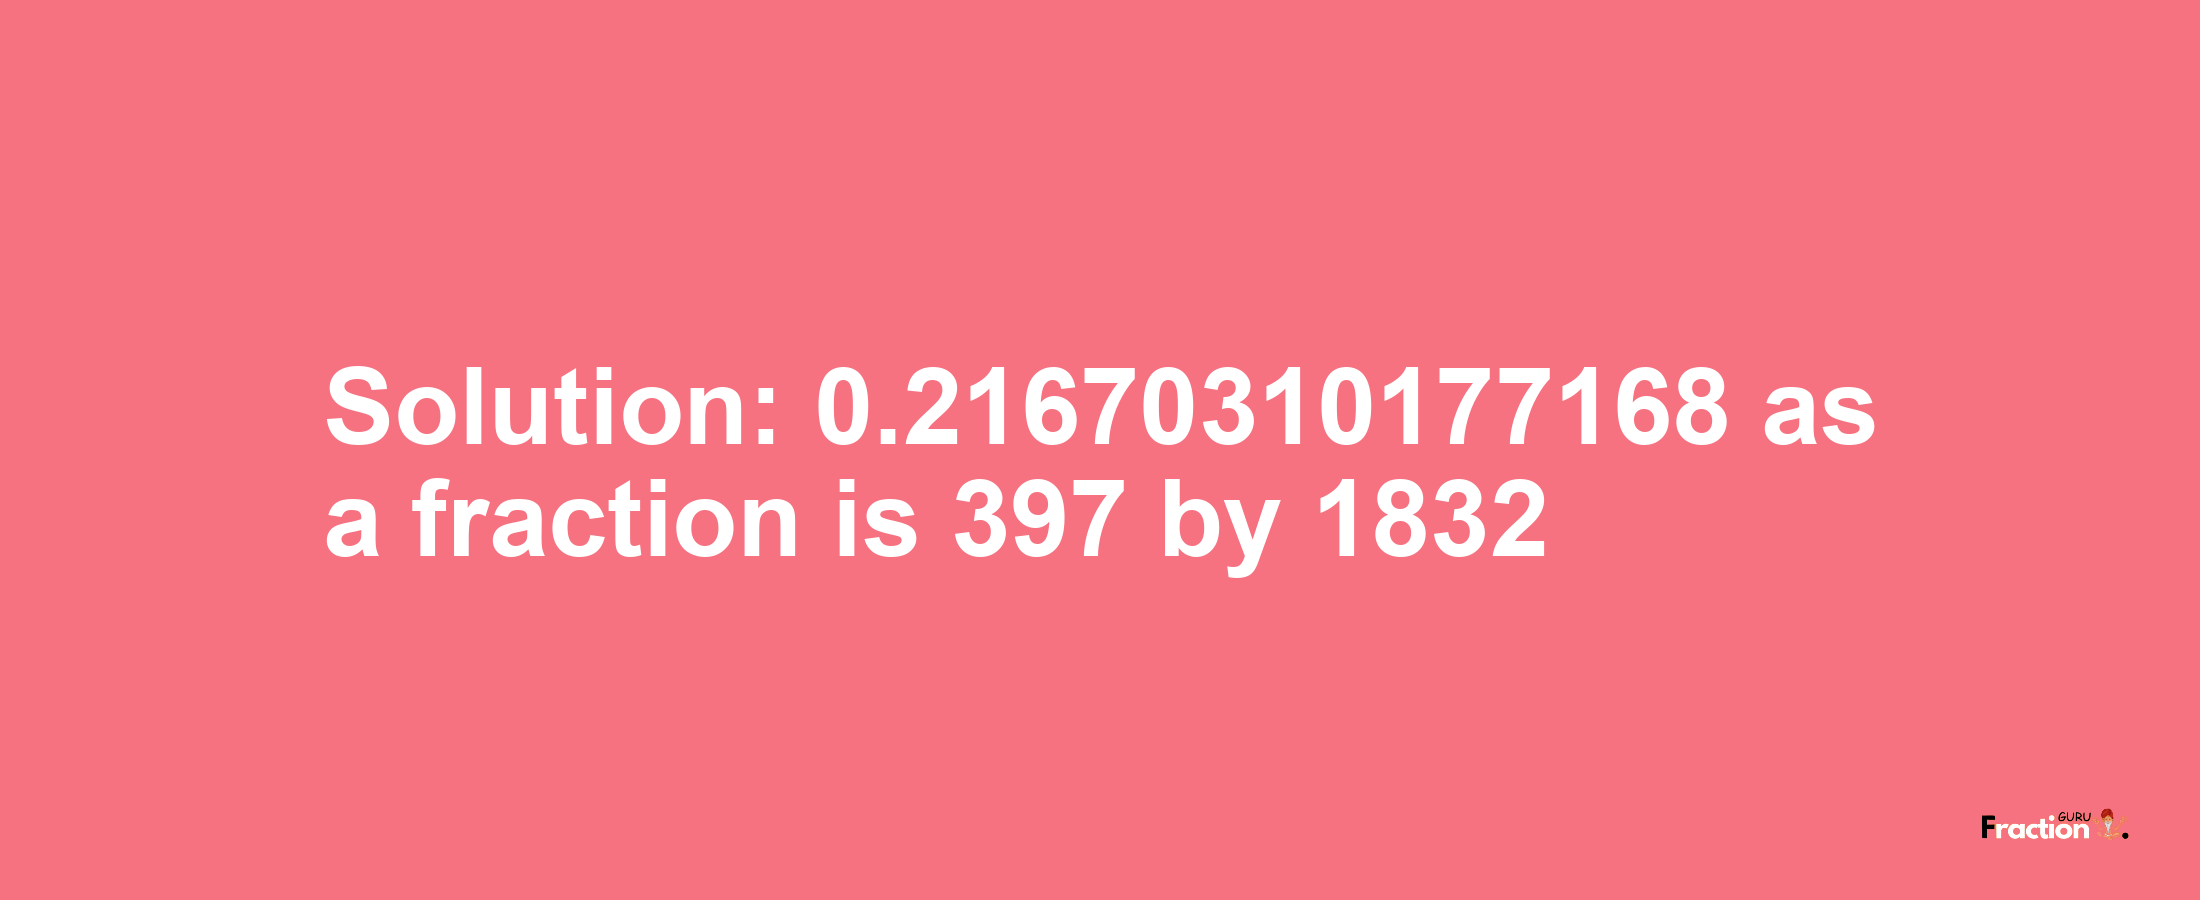 Solution:0.21670310177168 as a fraction is 397/1832